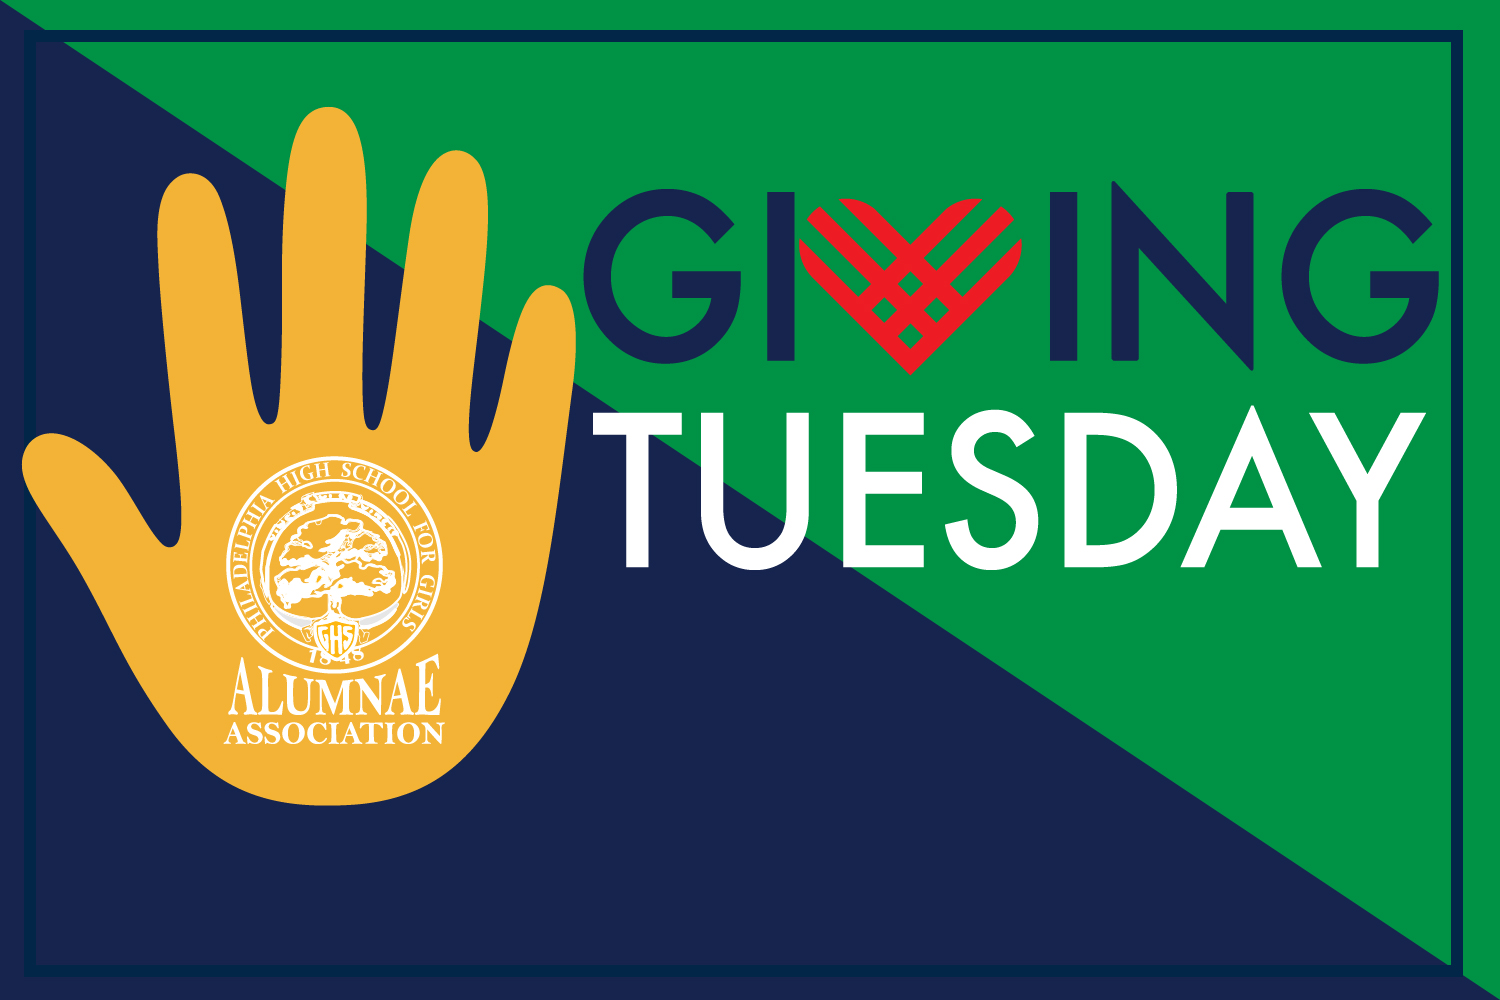 Alumnae for Giving Tuesday